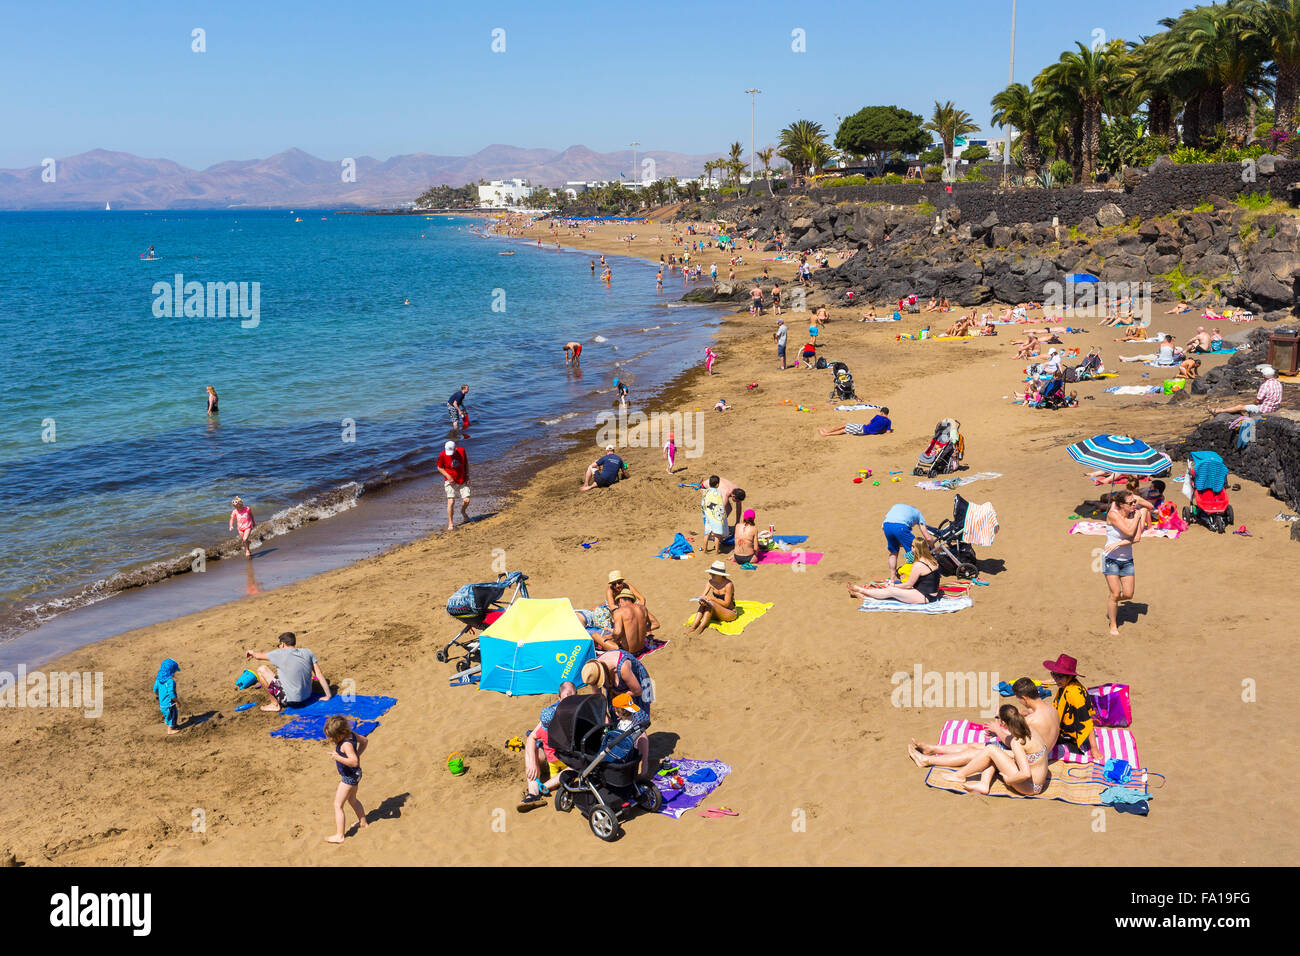 Playa Grande, the town beach in Puerto del Carmen, Lanzarote, Canary Islands, Spain, Southern Europe Stock Photo